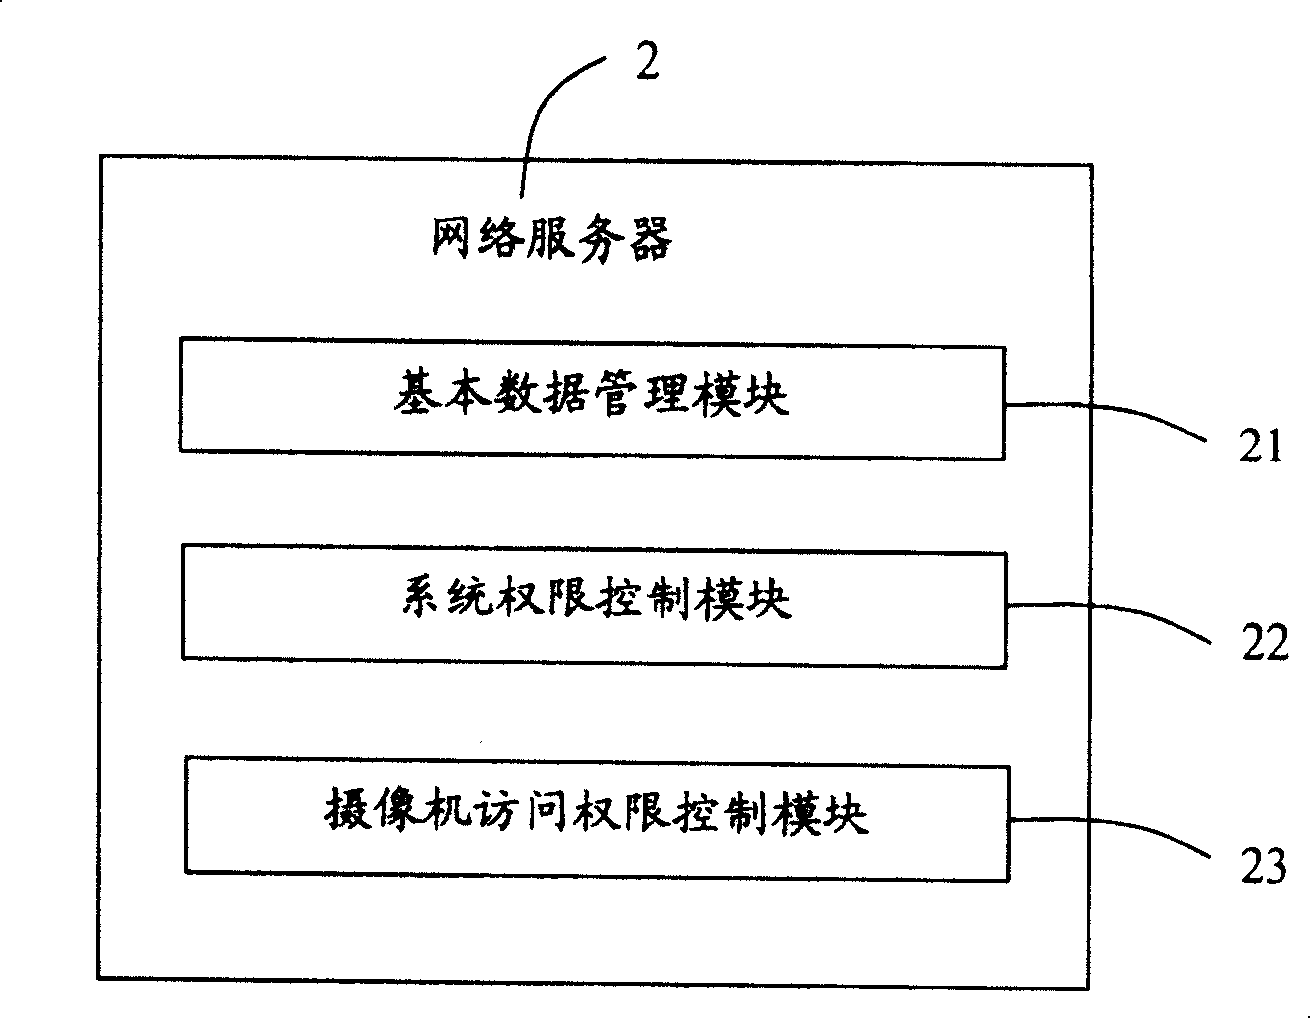 Network video data replay system and method